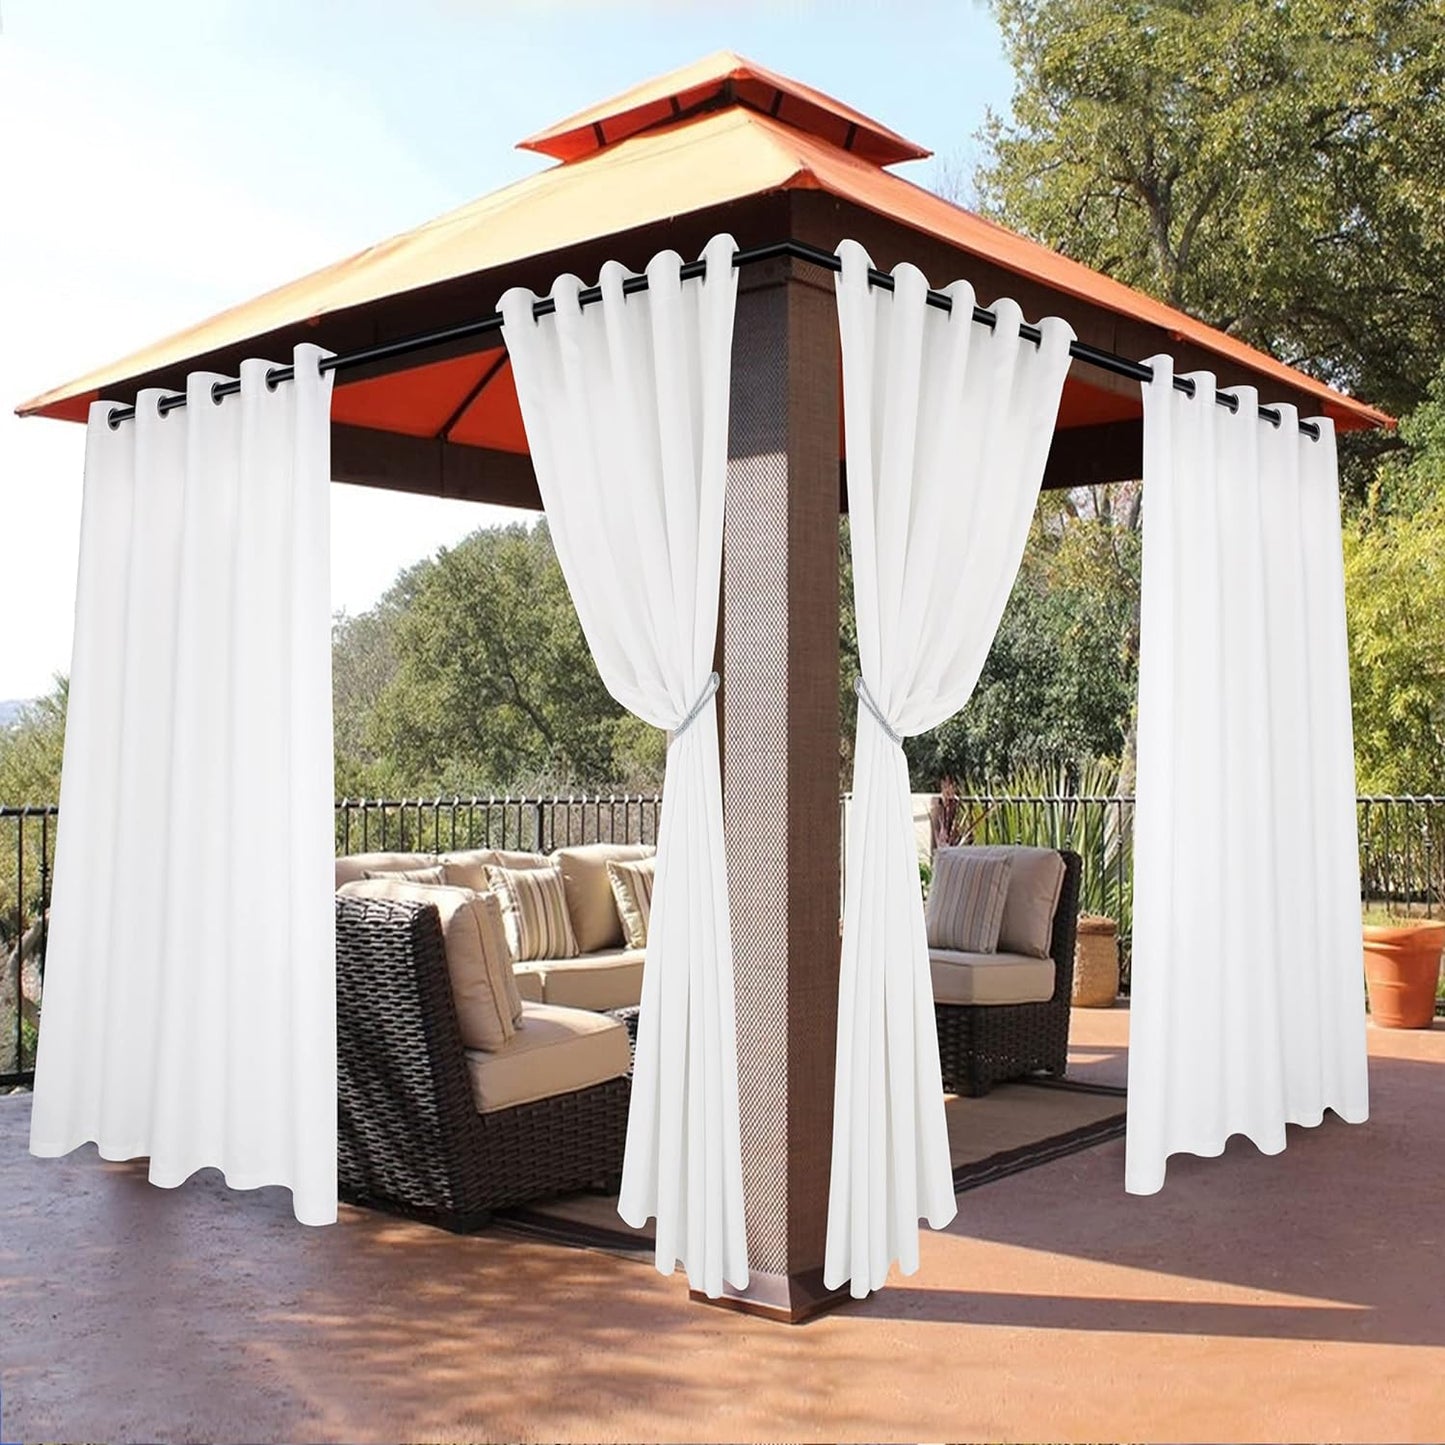 BONZER Outdoor Curtains for Patio Waterproof - Light Blocking Weather Resistant Privacy Grommet Blackout Curtains for Gazebo, Porch, Pergola, Cabana, Deck, Sunroom, 1 Panel, 52W X 84L Inch, Silver  BONZER White 70W X 120 Inch 